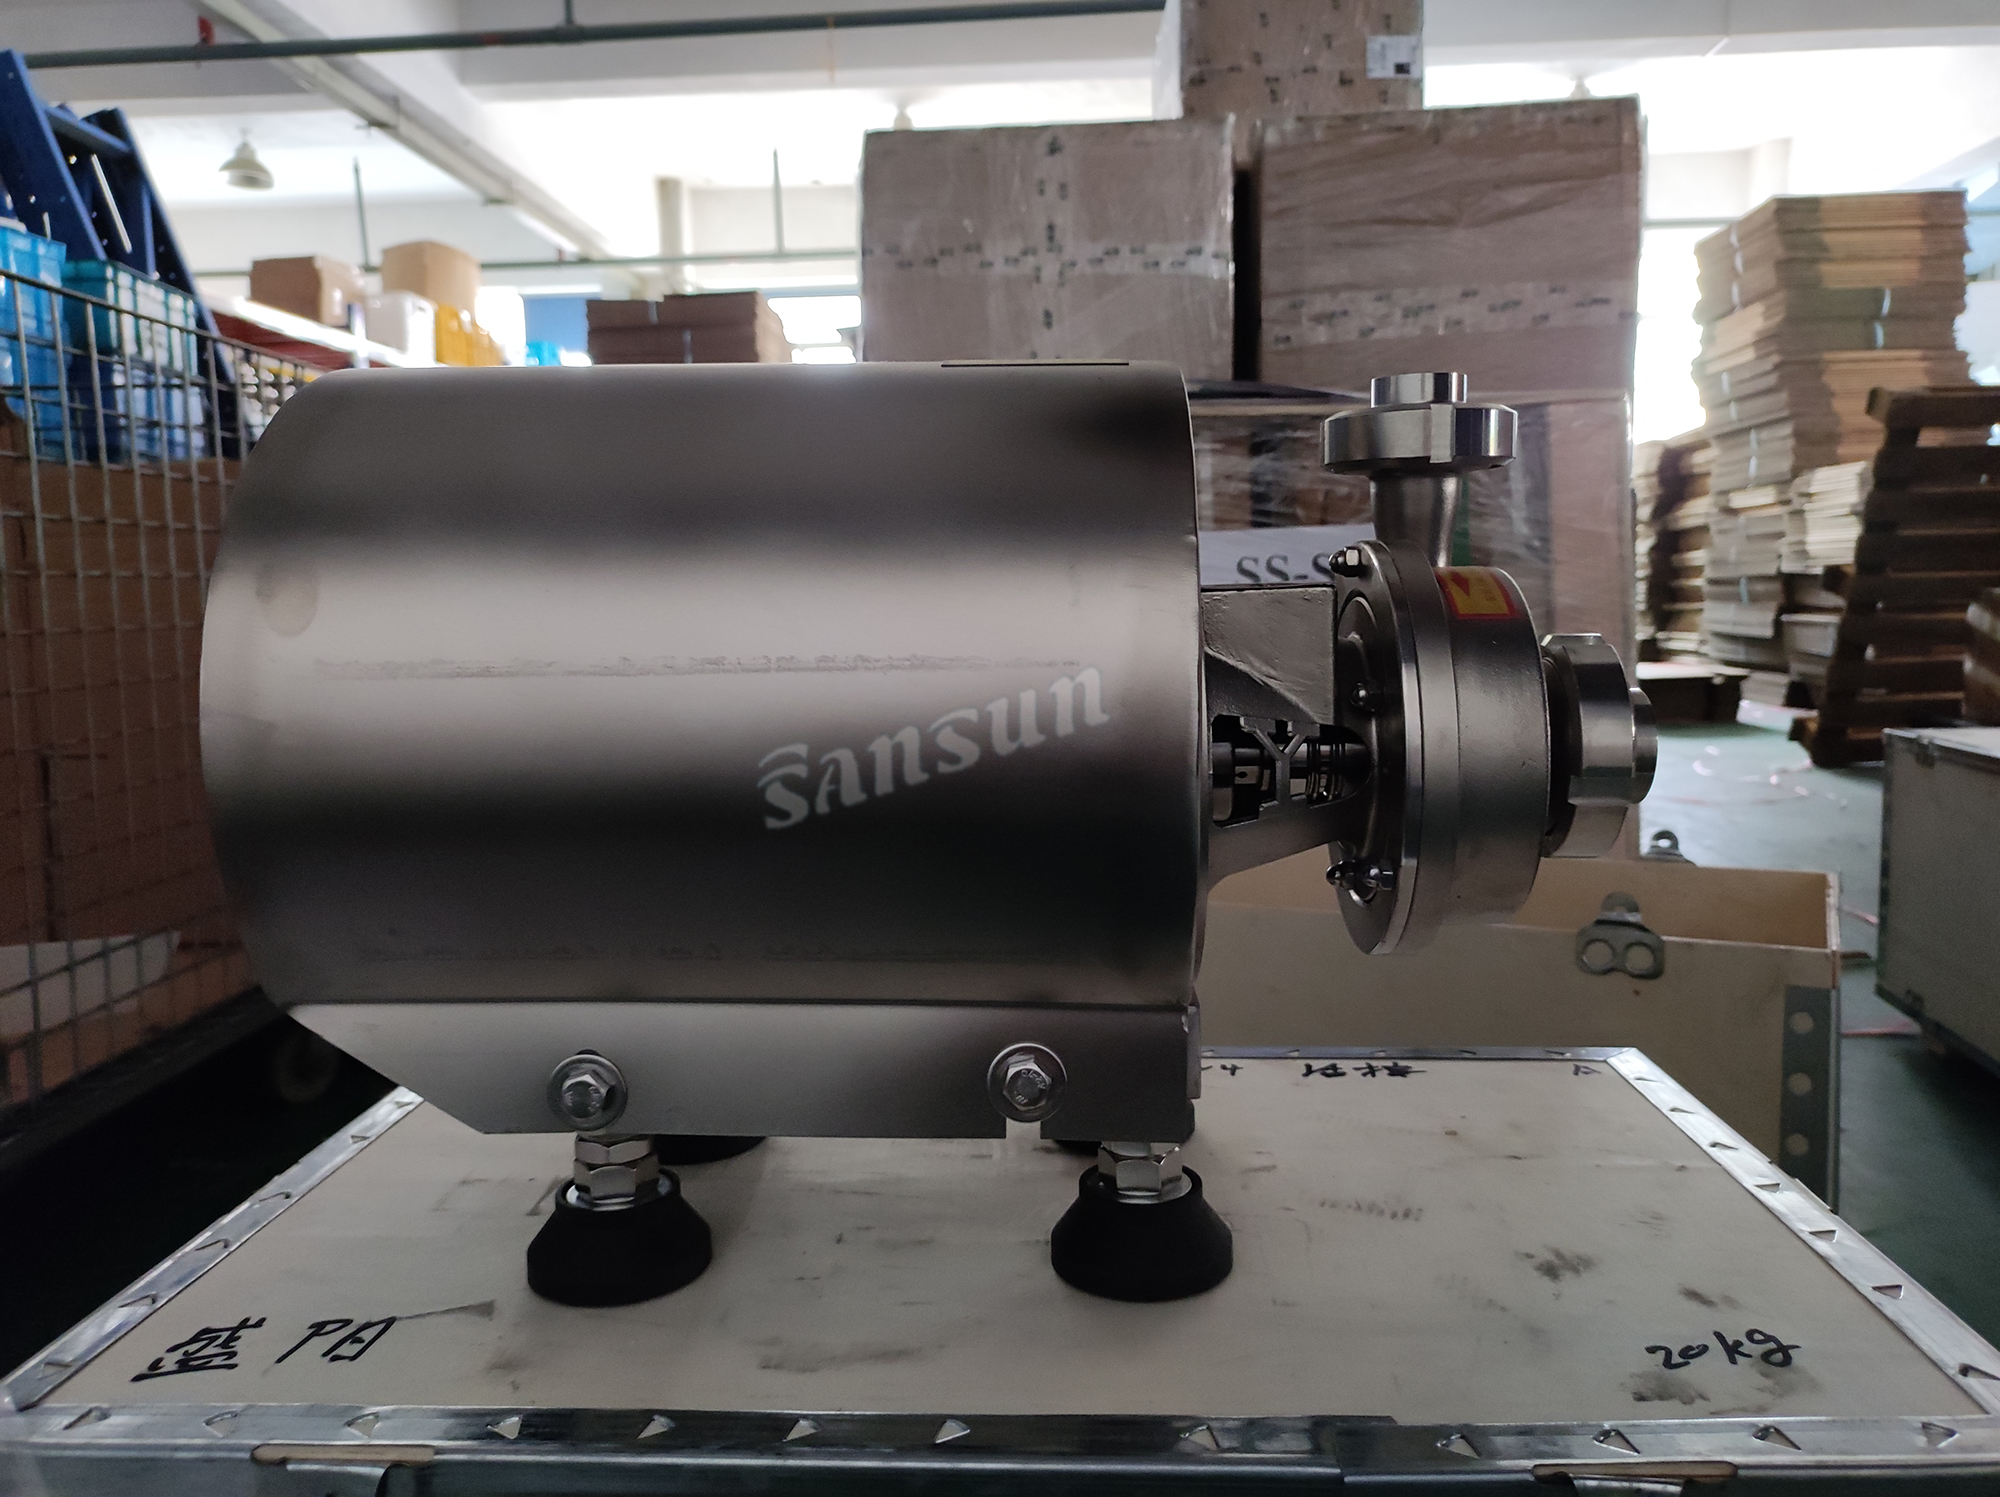 Food Grade Stainless Steel Self Priming Centrifugal Water Pump for Milk